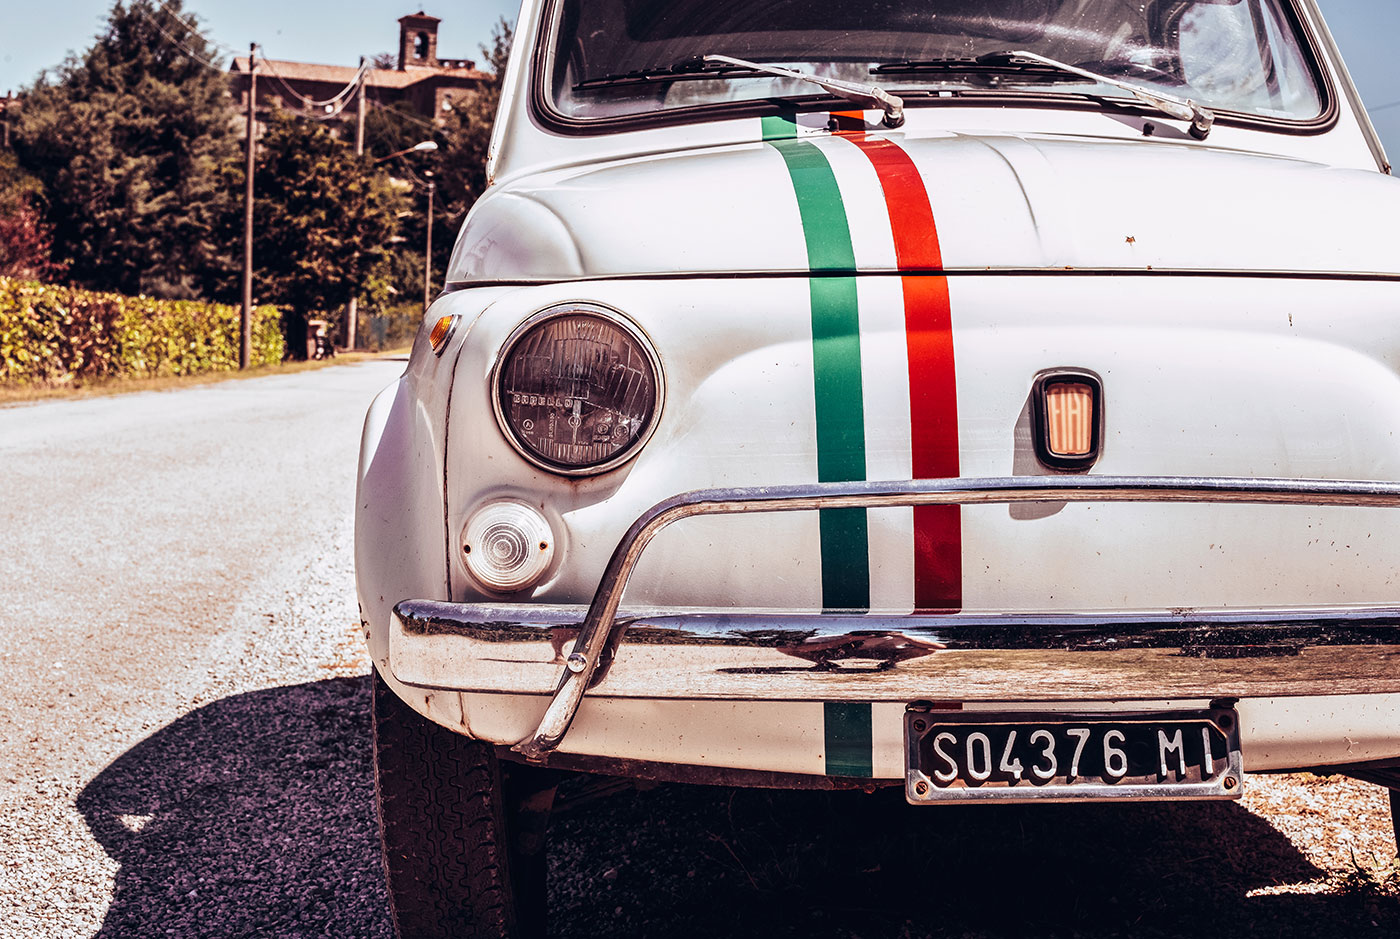 20 Hilarious Everyday Italian Expressions You Should Use